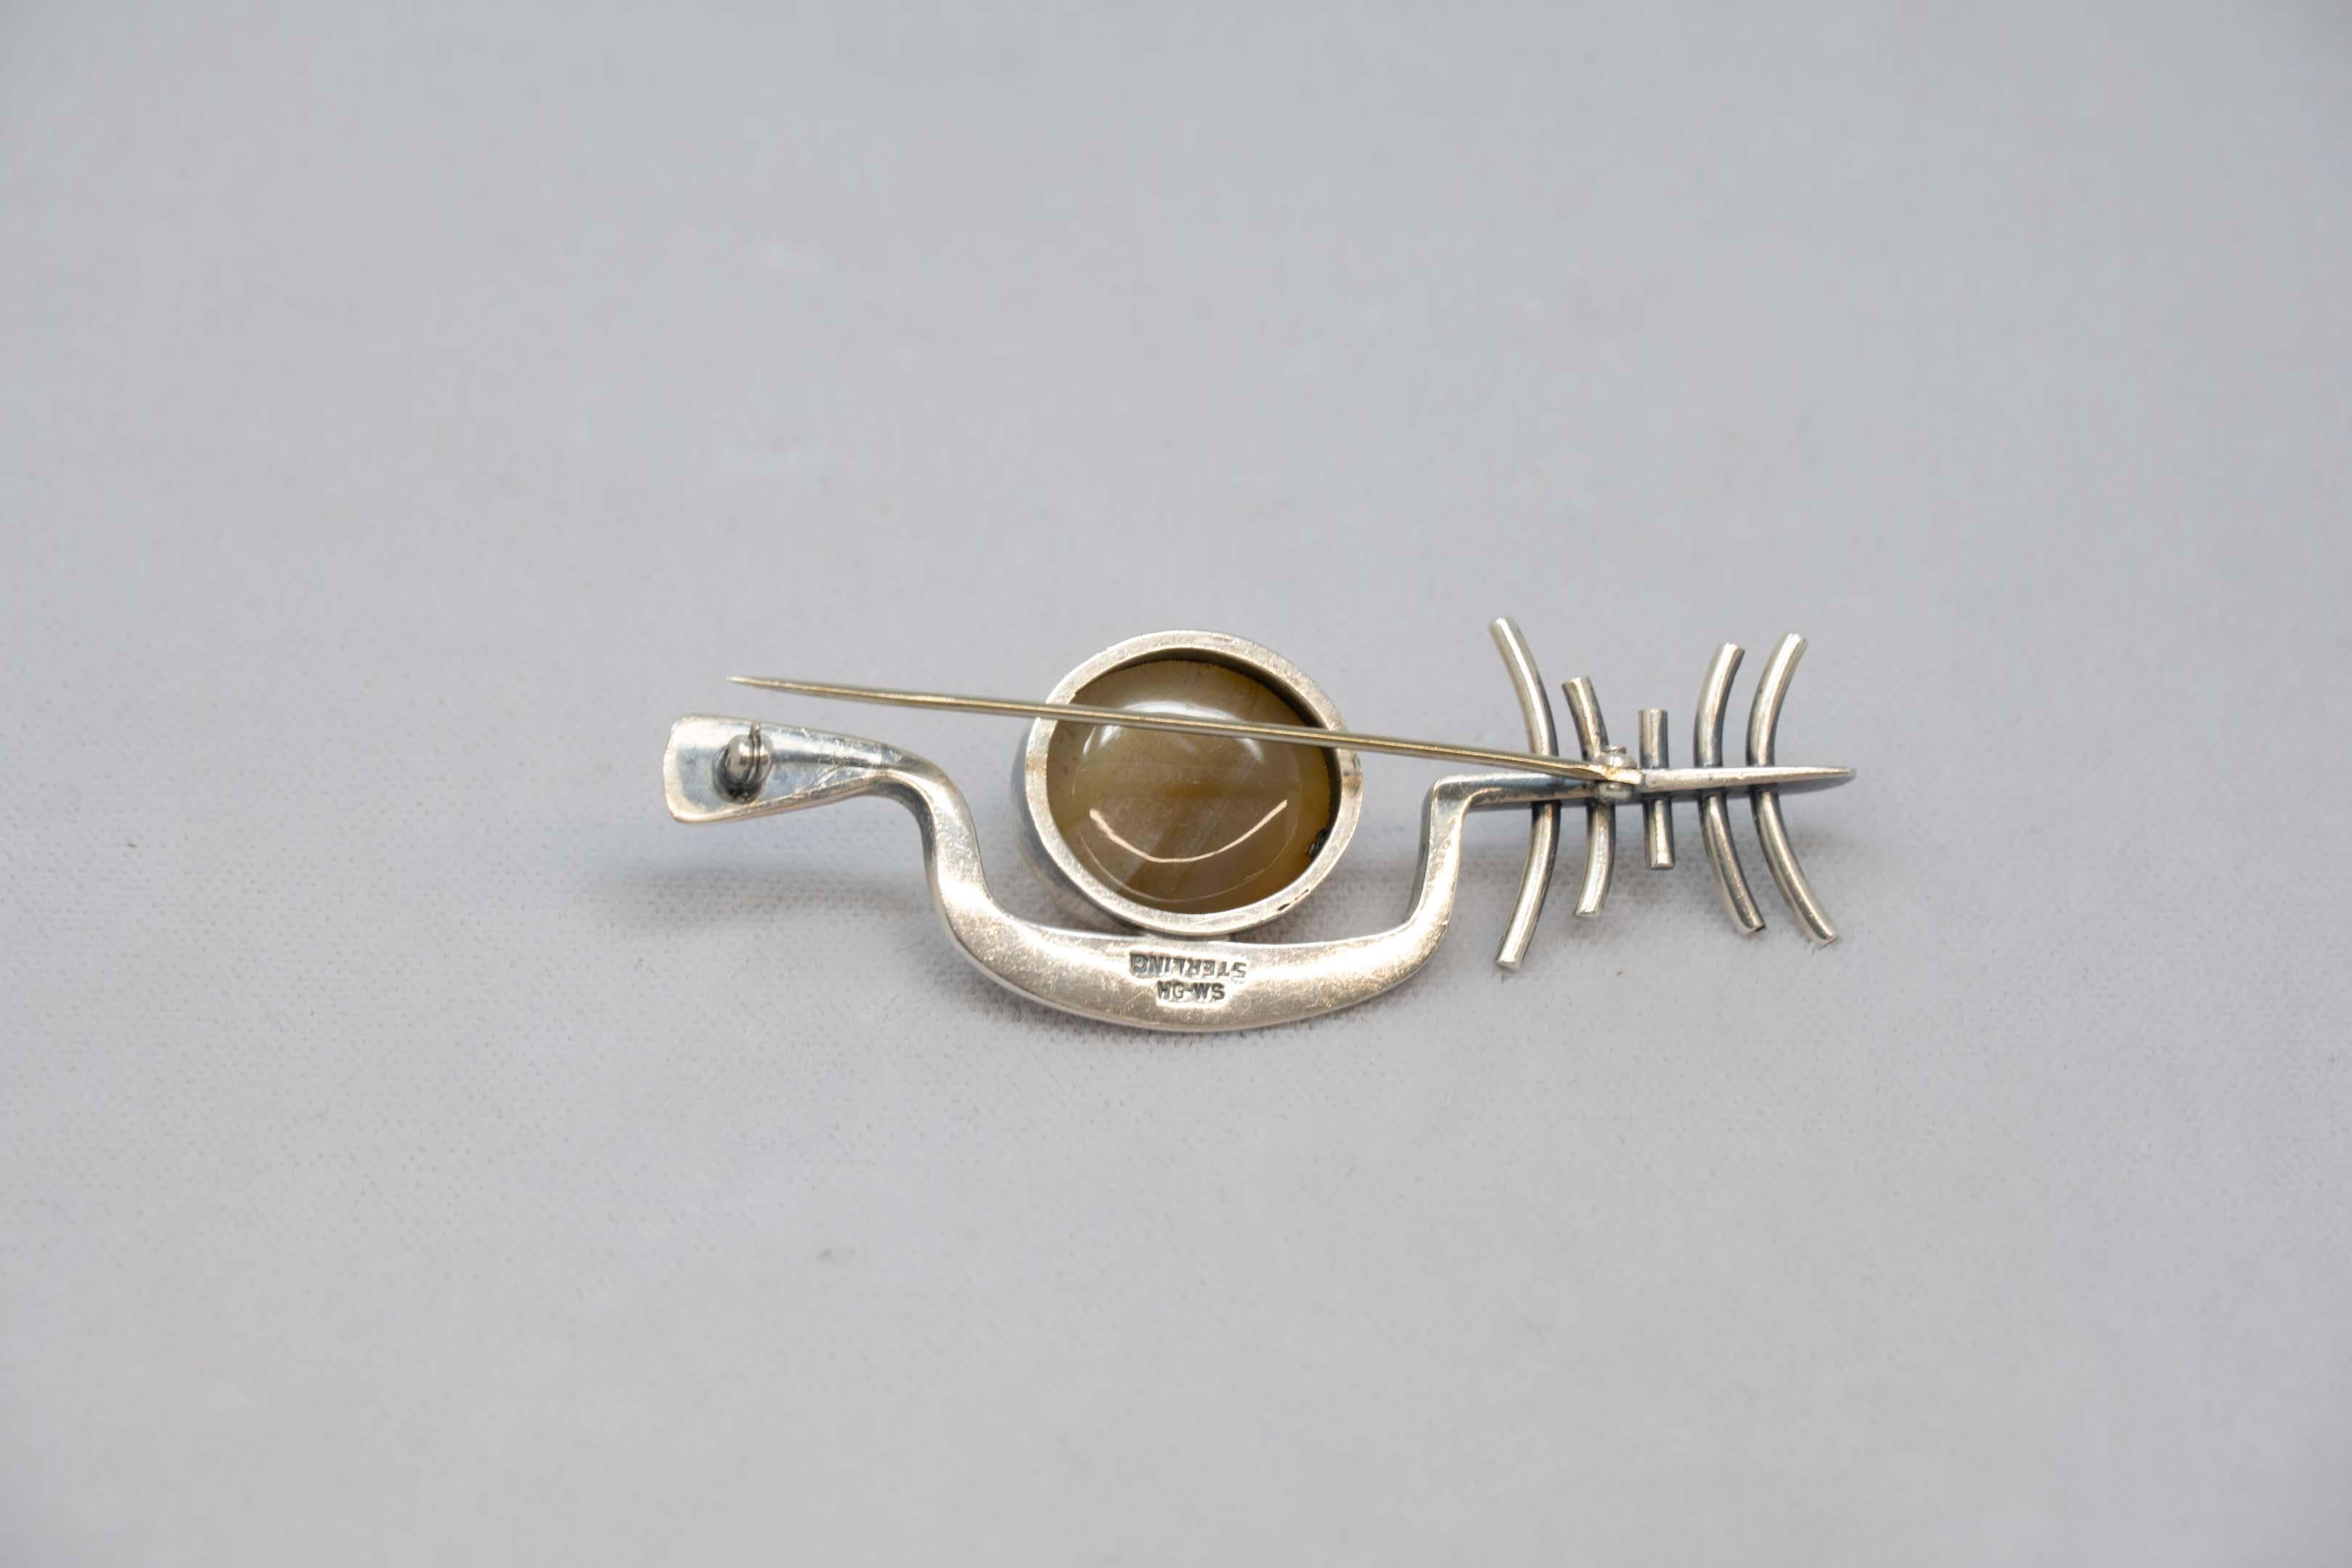 Sterling brooch modernist design with a 20 x 17 mm, agate semi precious stone, circa 1980. Signed HG-WS sterling, brooch measures 3 inches long. In good condition.
